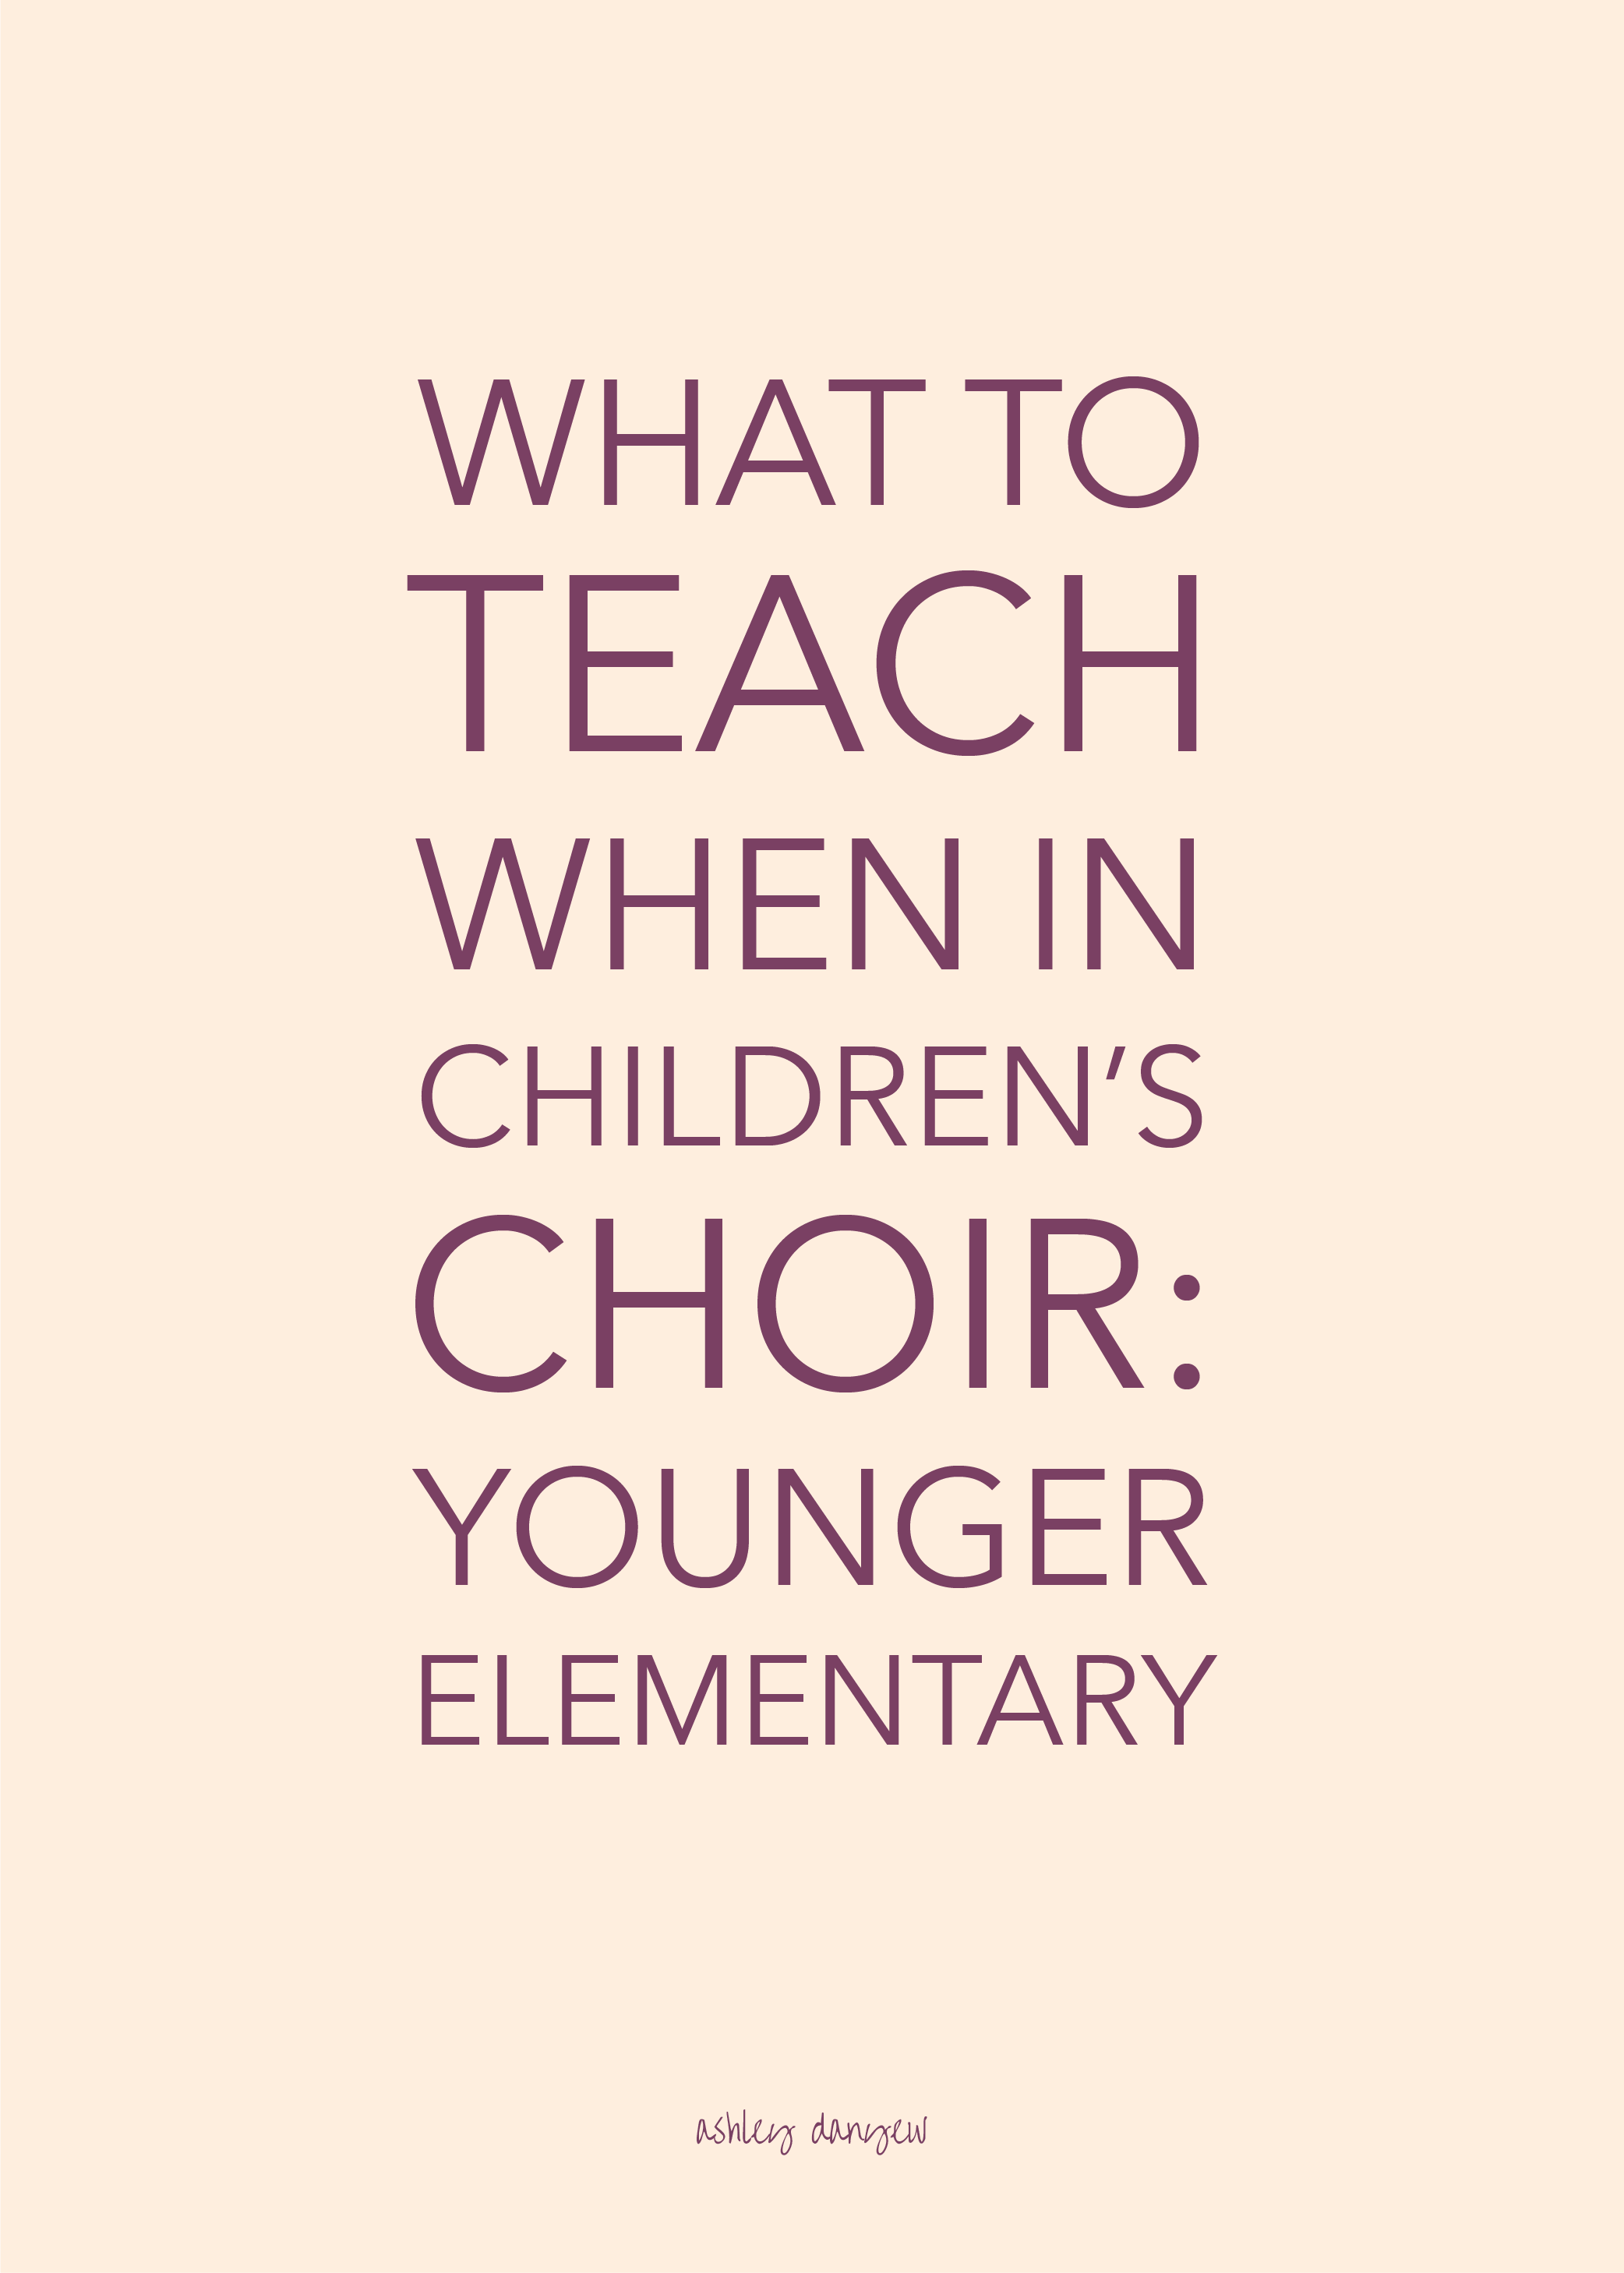 What to Teach When in Children's Choir: Younger Elementary